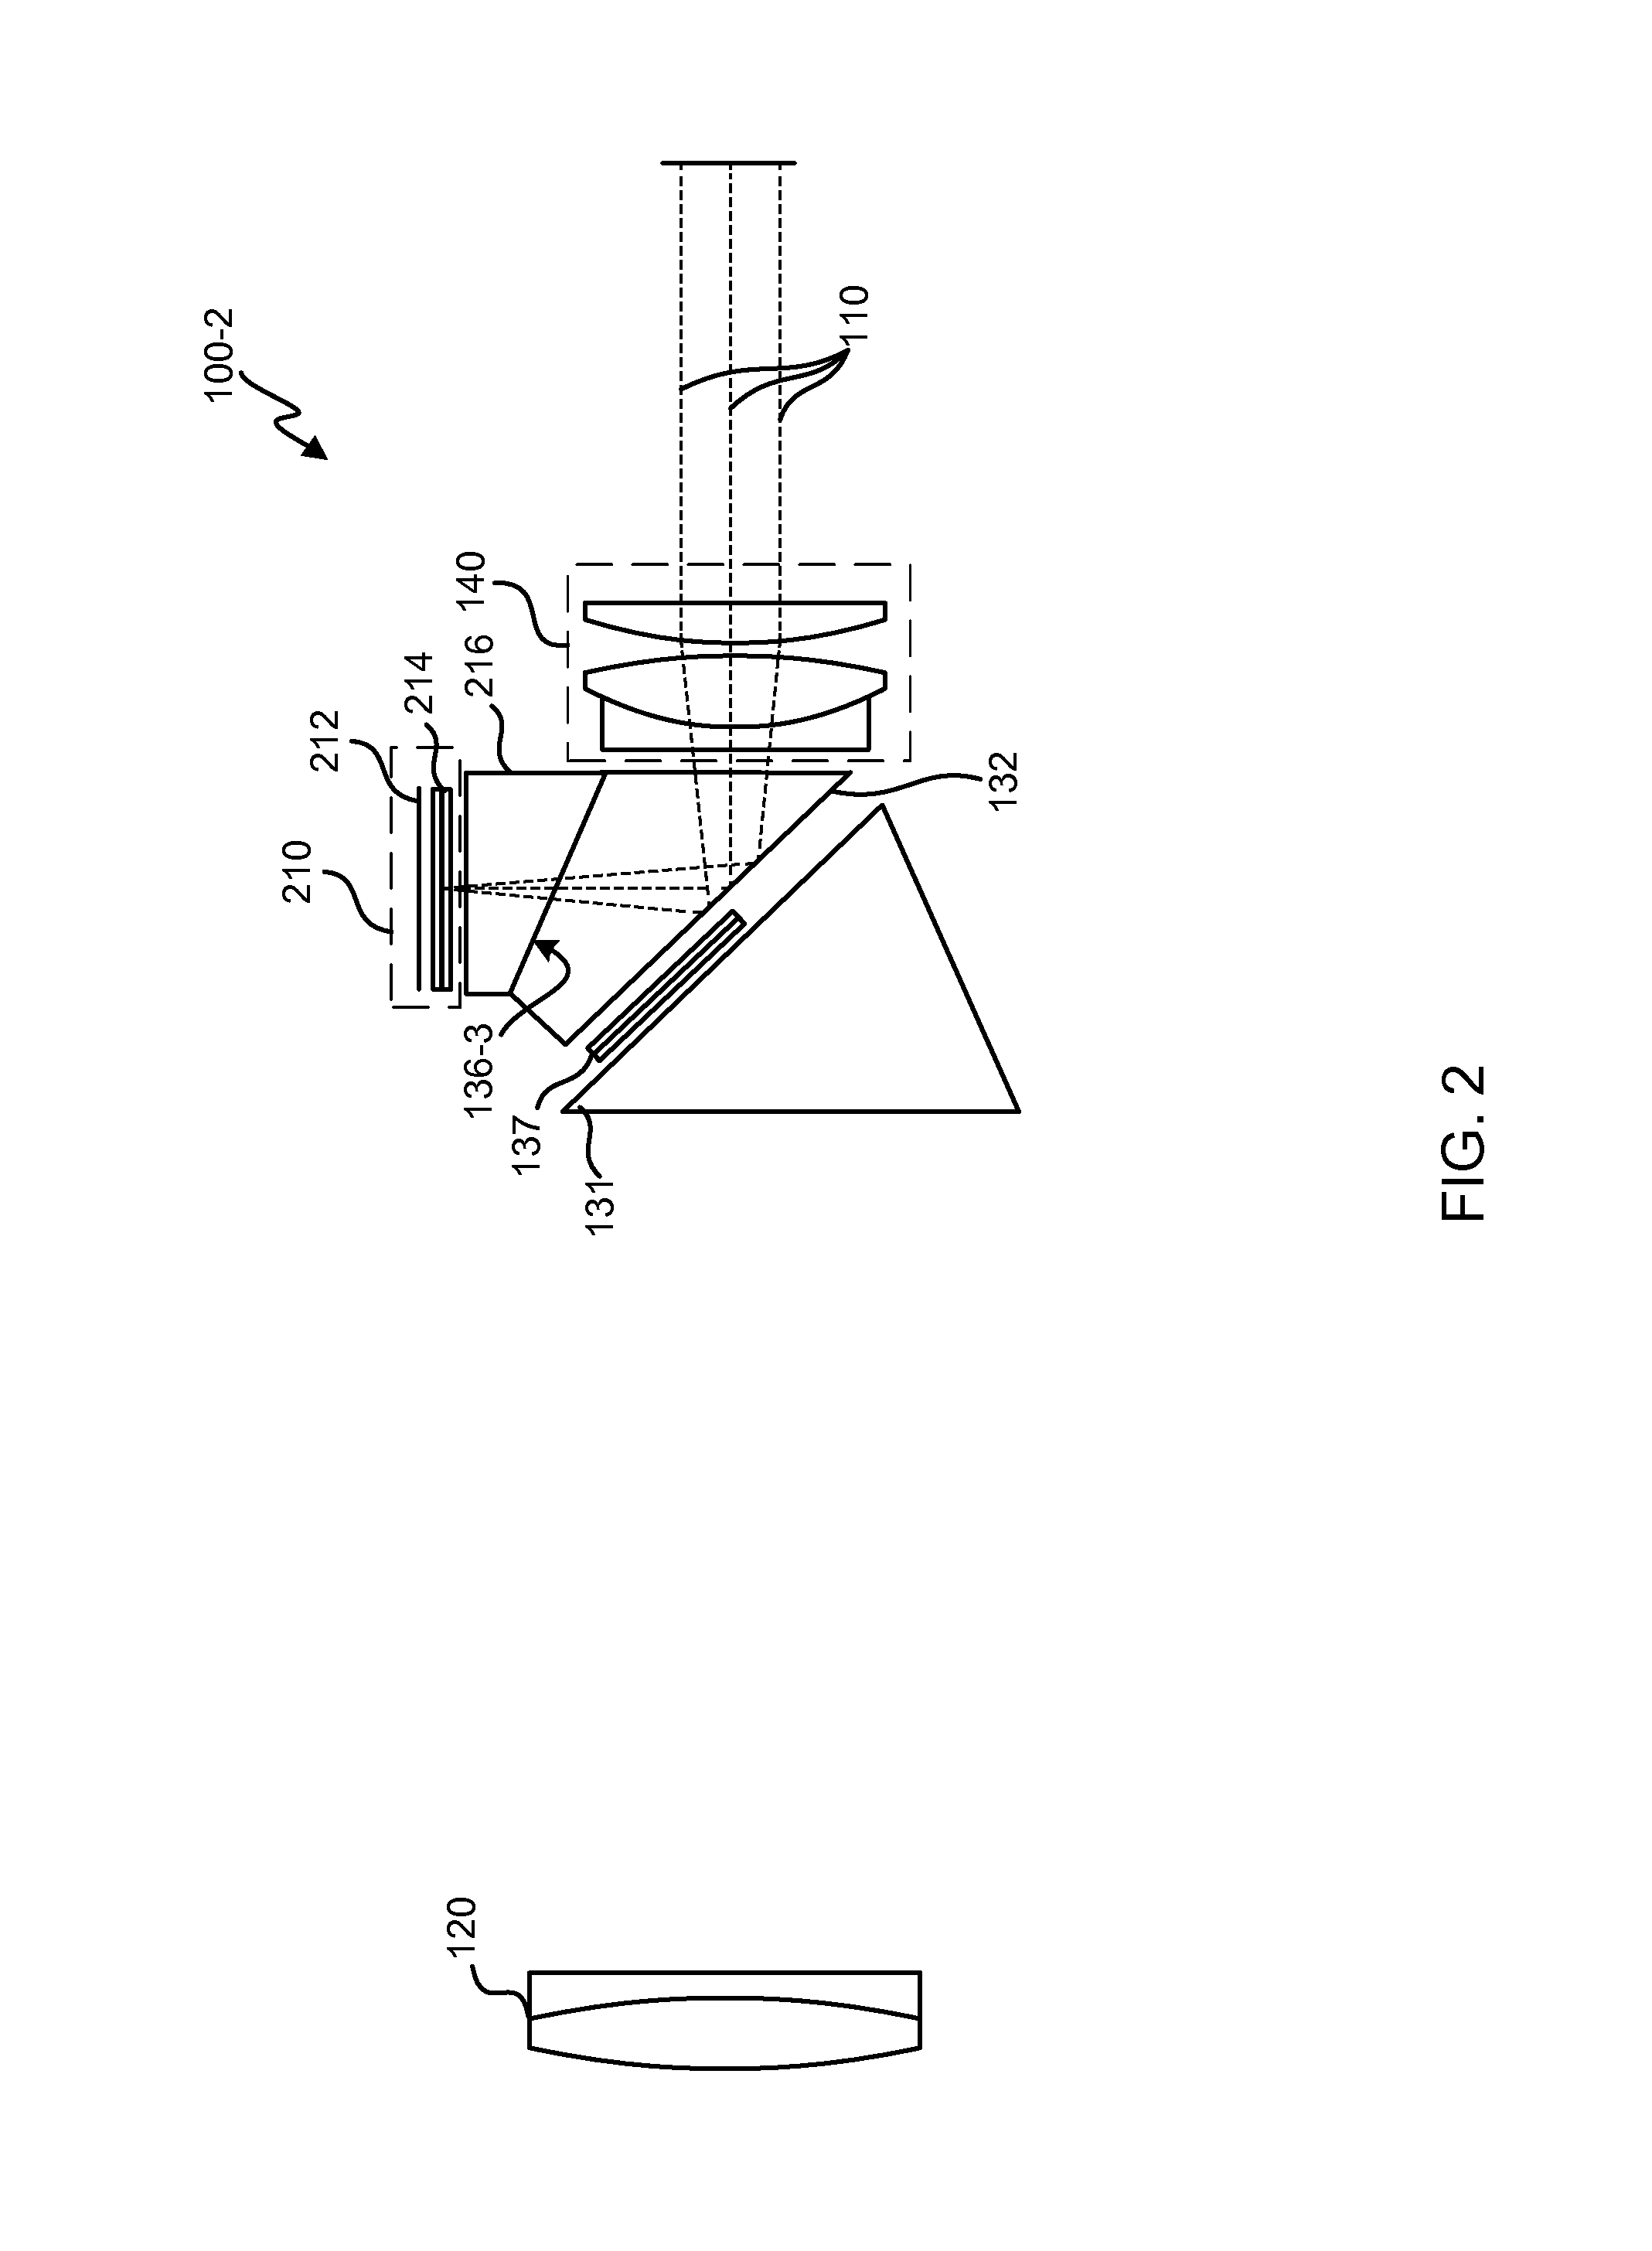 Integrated image erector and through-sight information display for telescope or other optical device